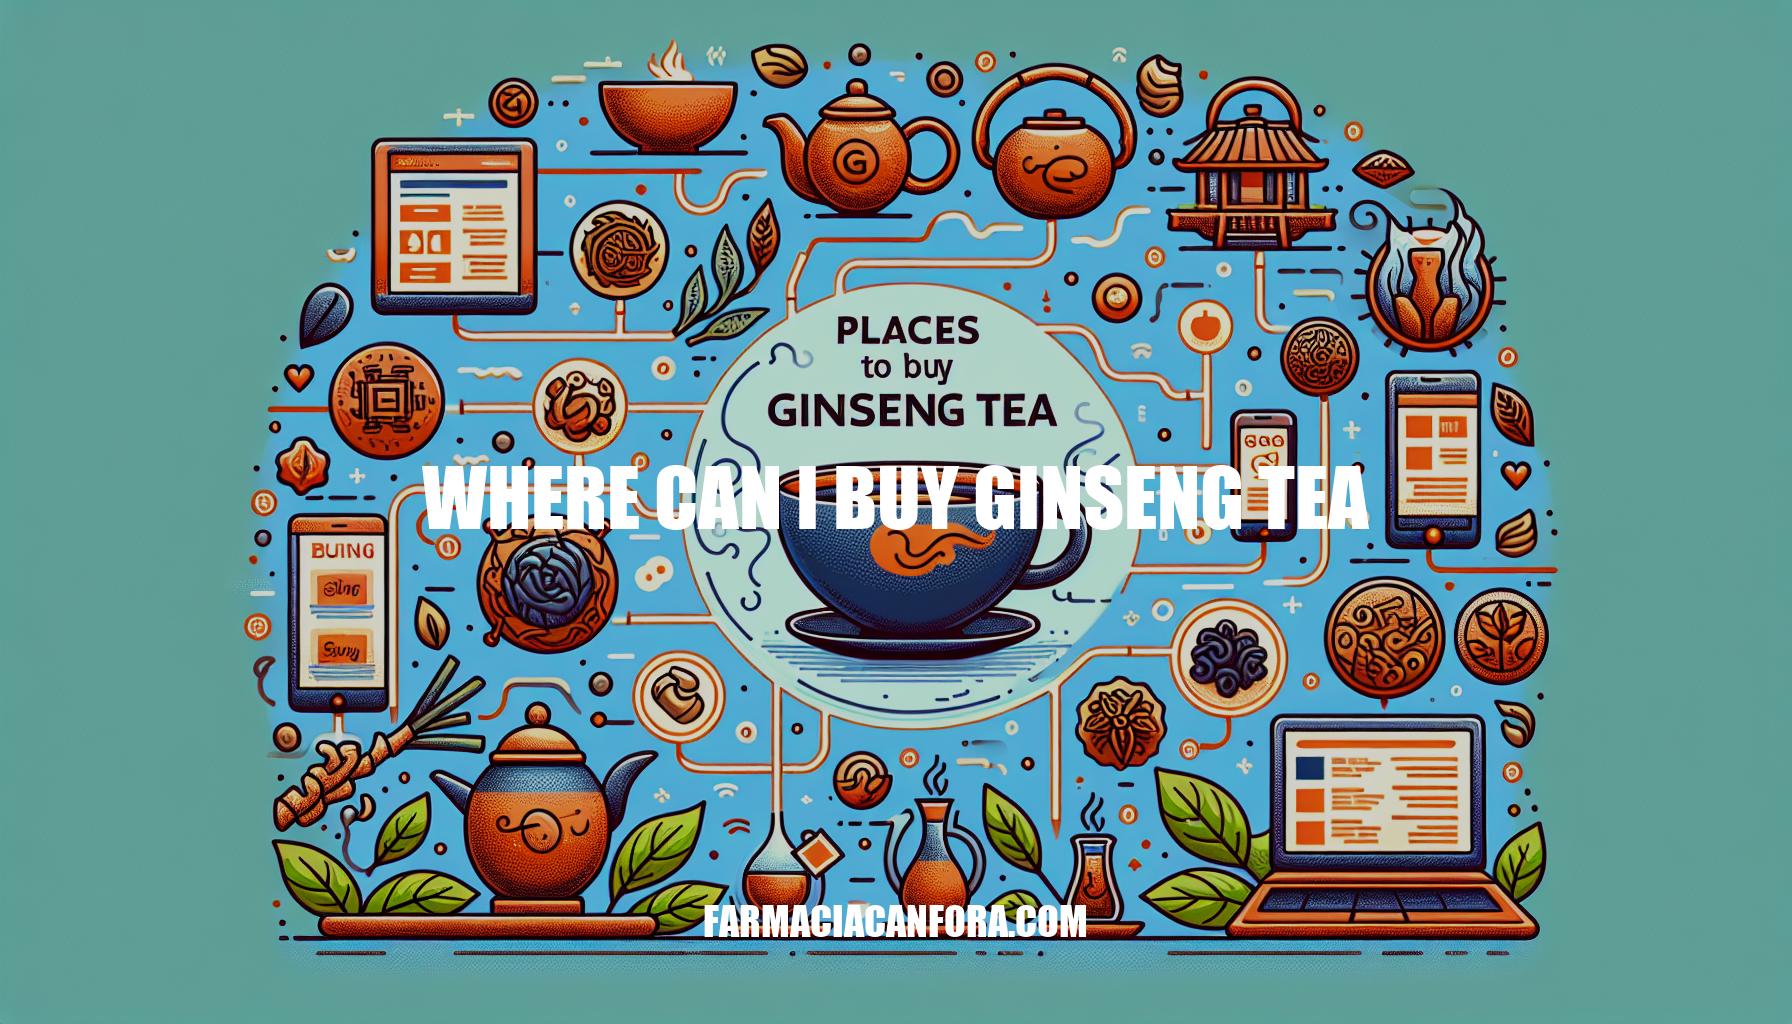 Where Can I Buy Ginseng Tea - Best Places to Purchase Ginseng Tea Online